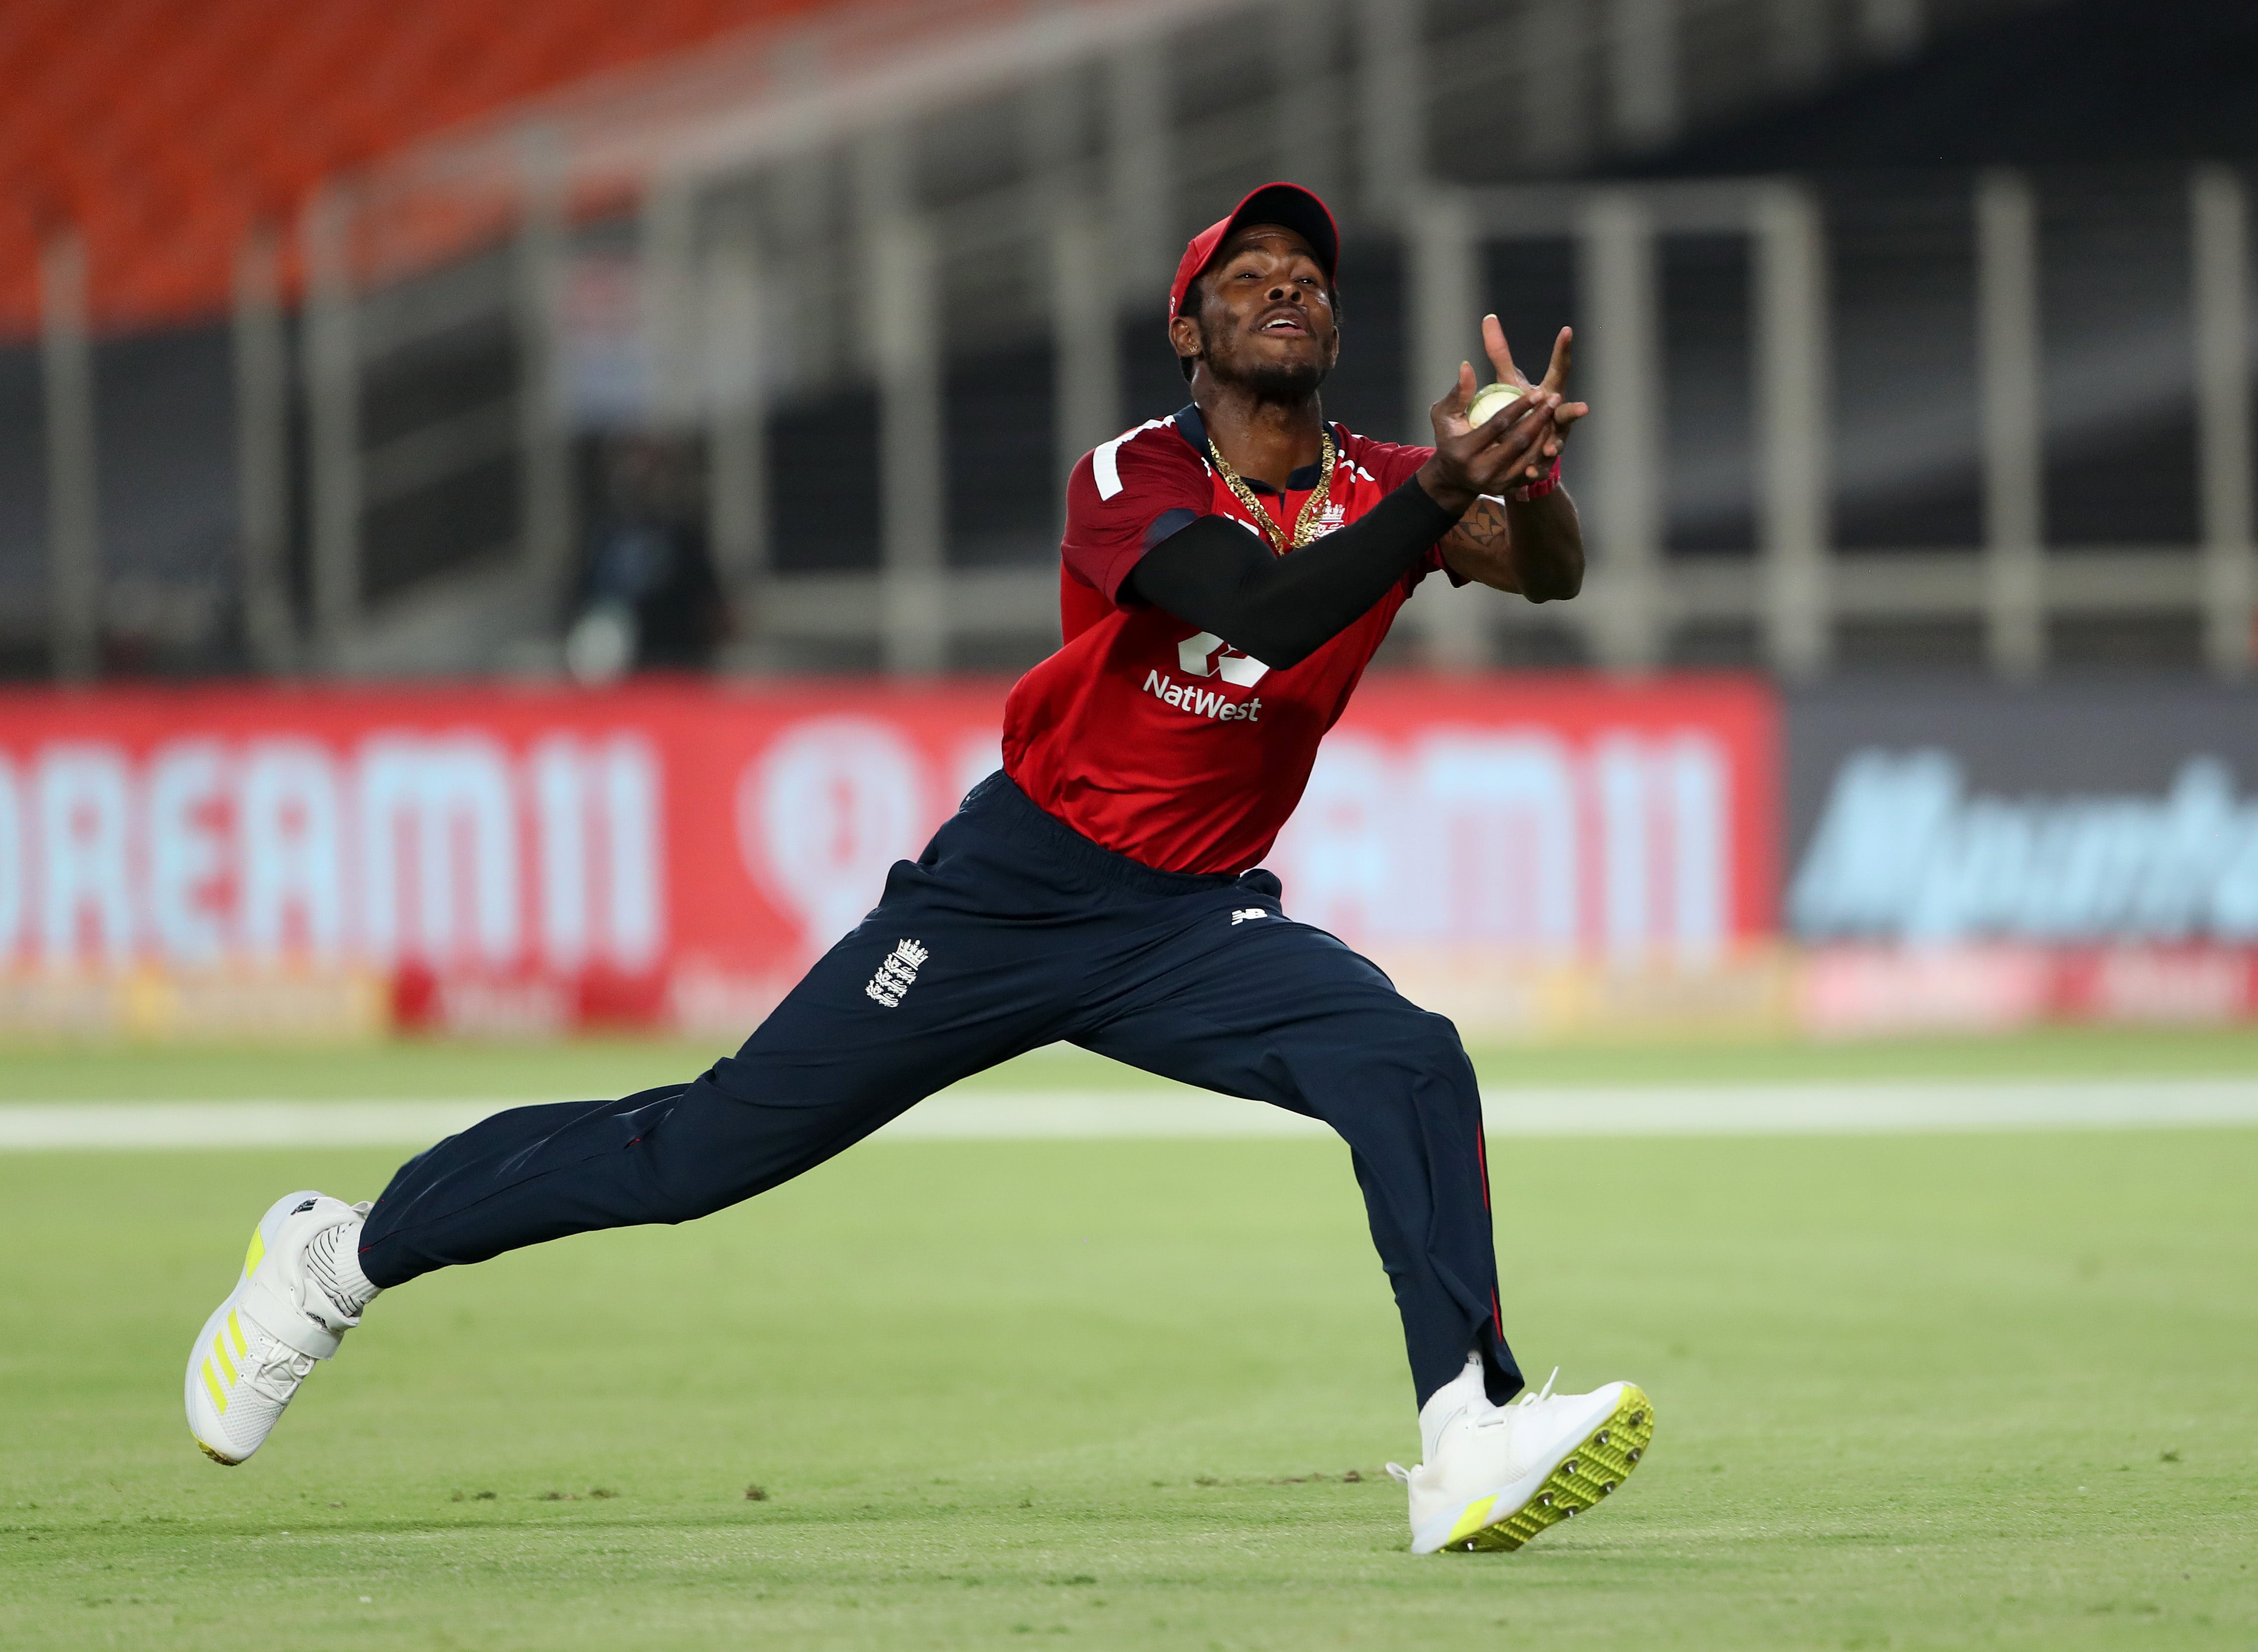 Jofra Archer will miss the start of the IPL this season